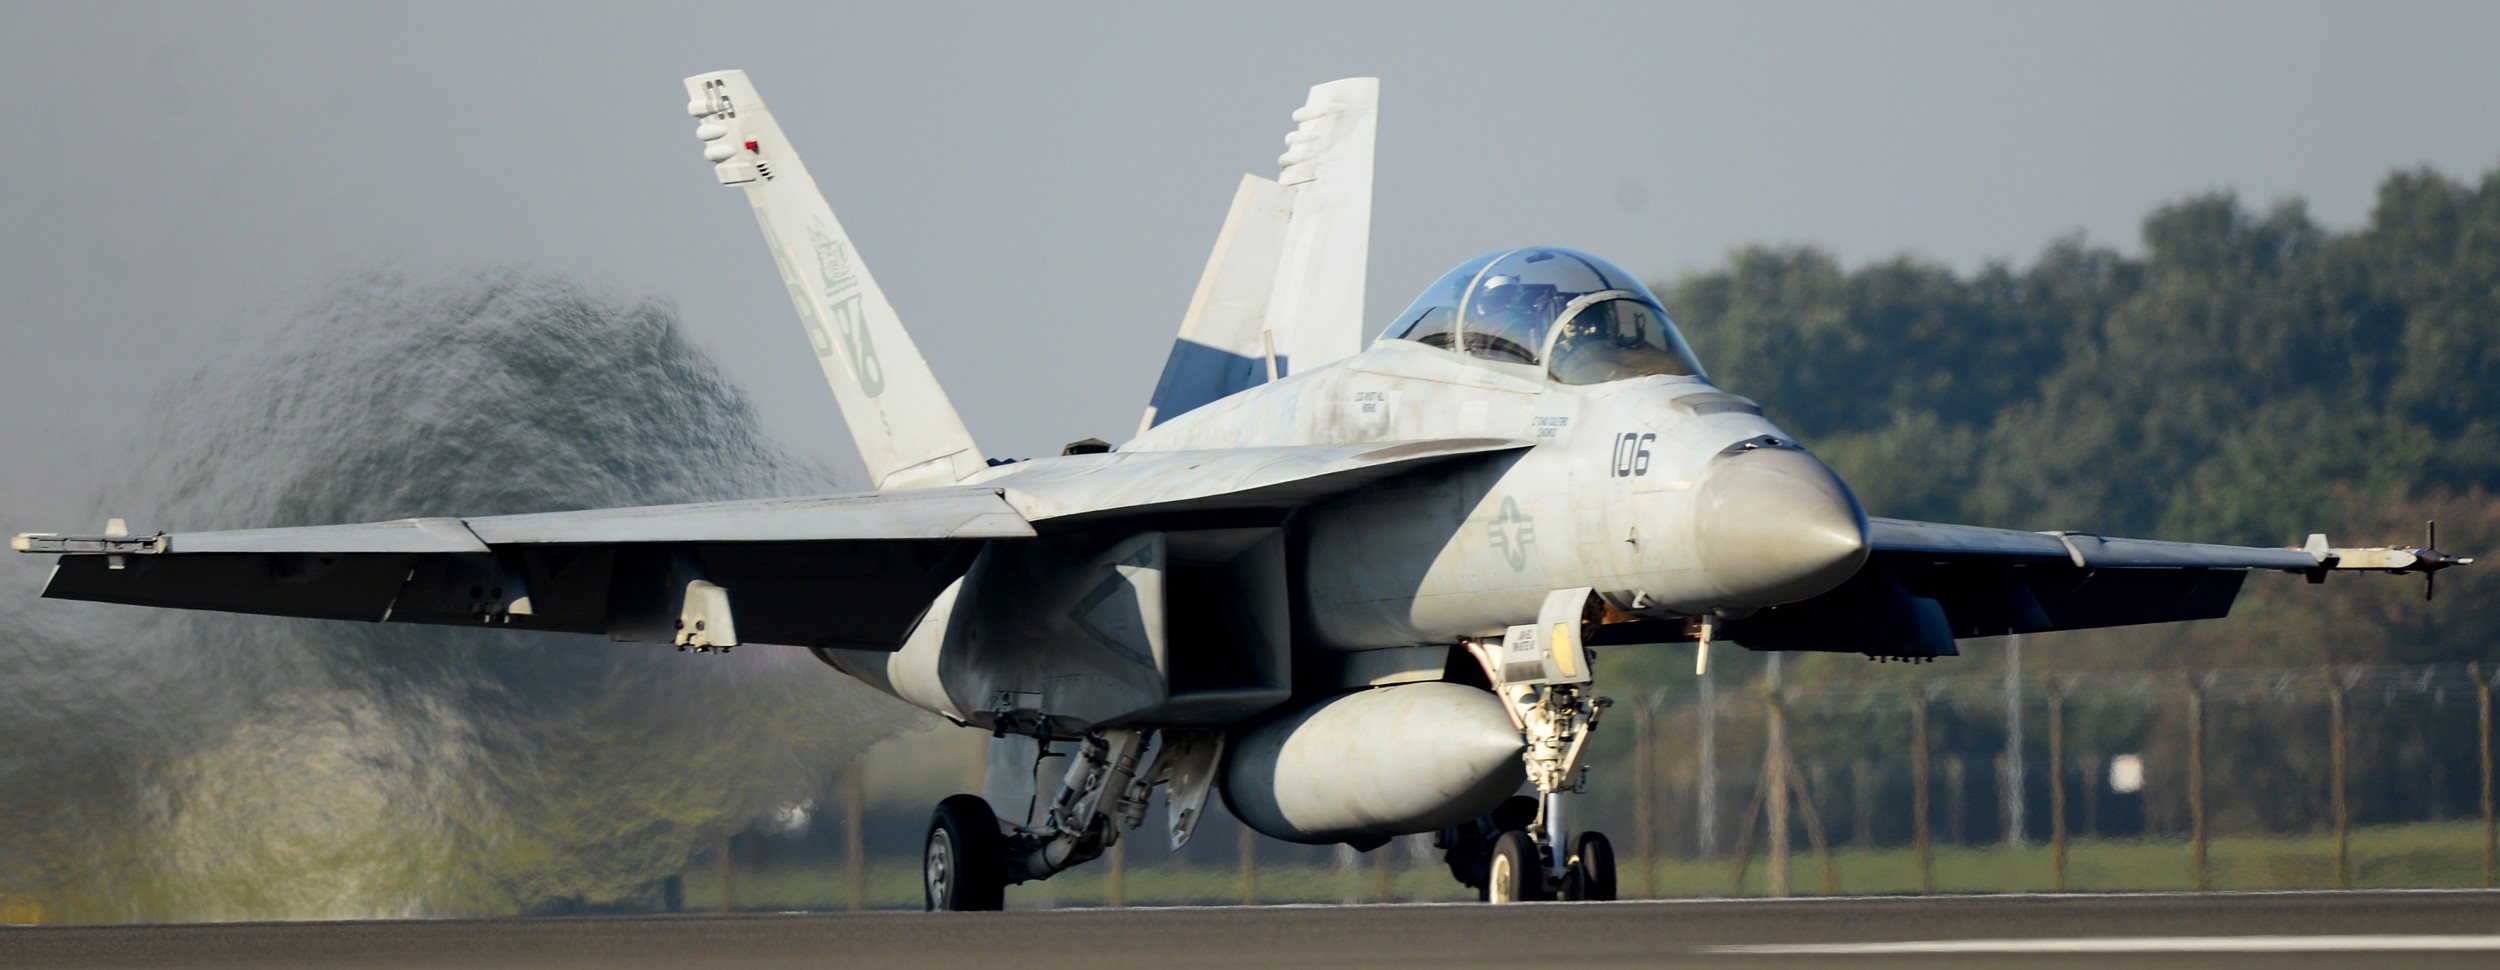 vfa-11 red rippers strike fighter squadron us navy f/a-18f super hornet raf lakenheath uk 96